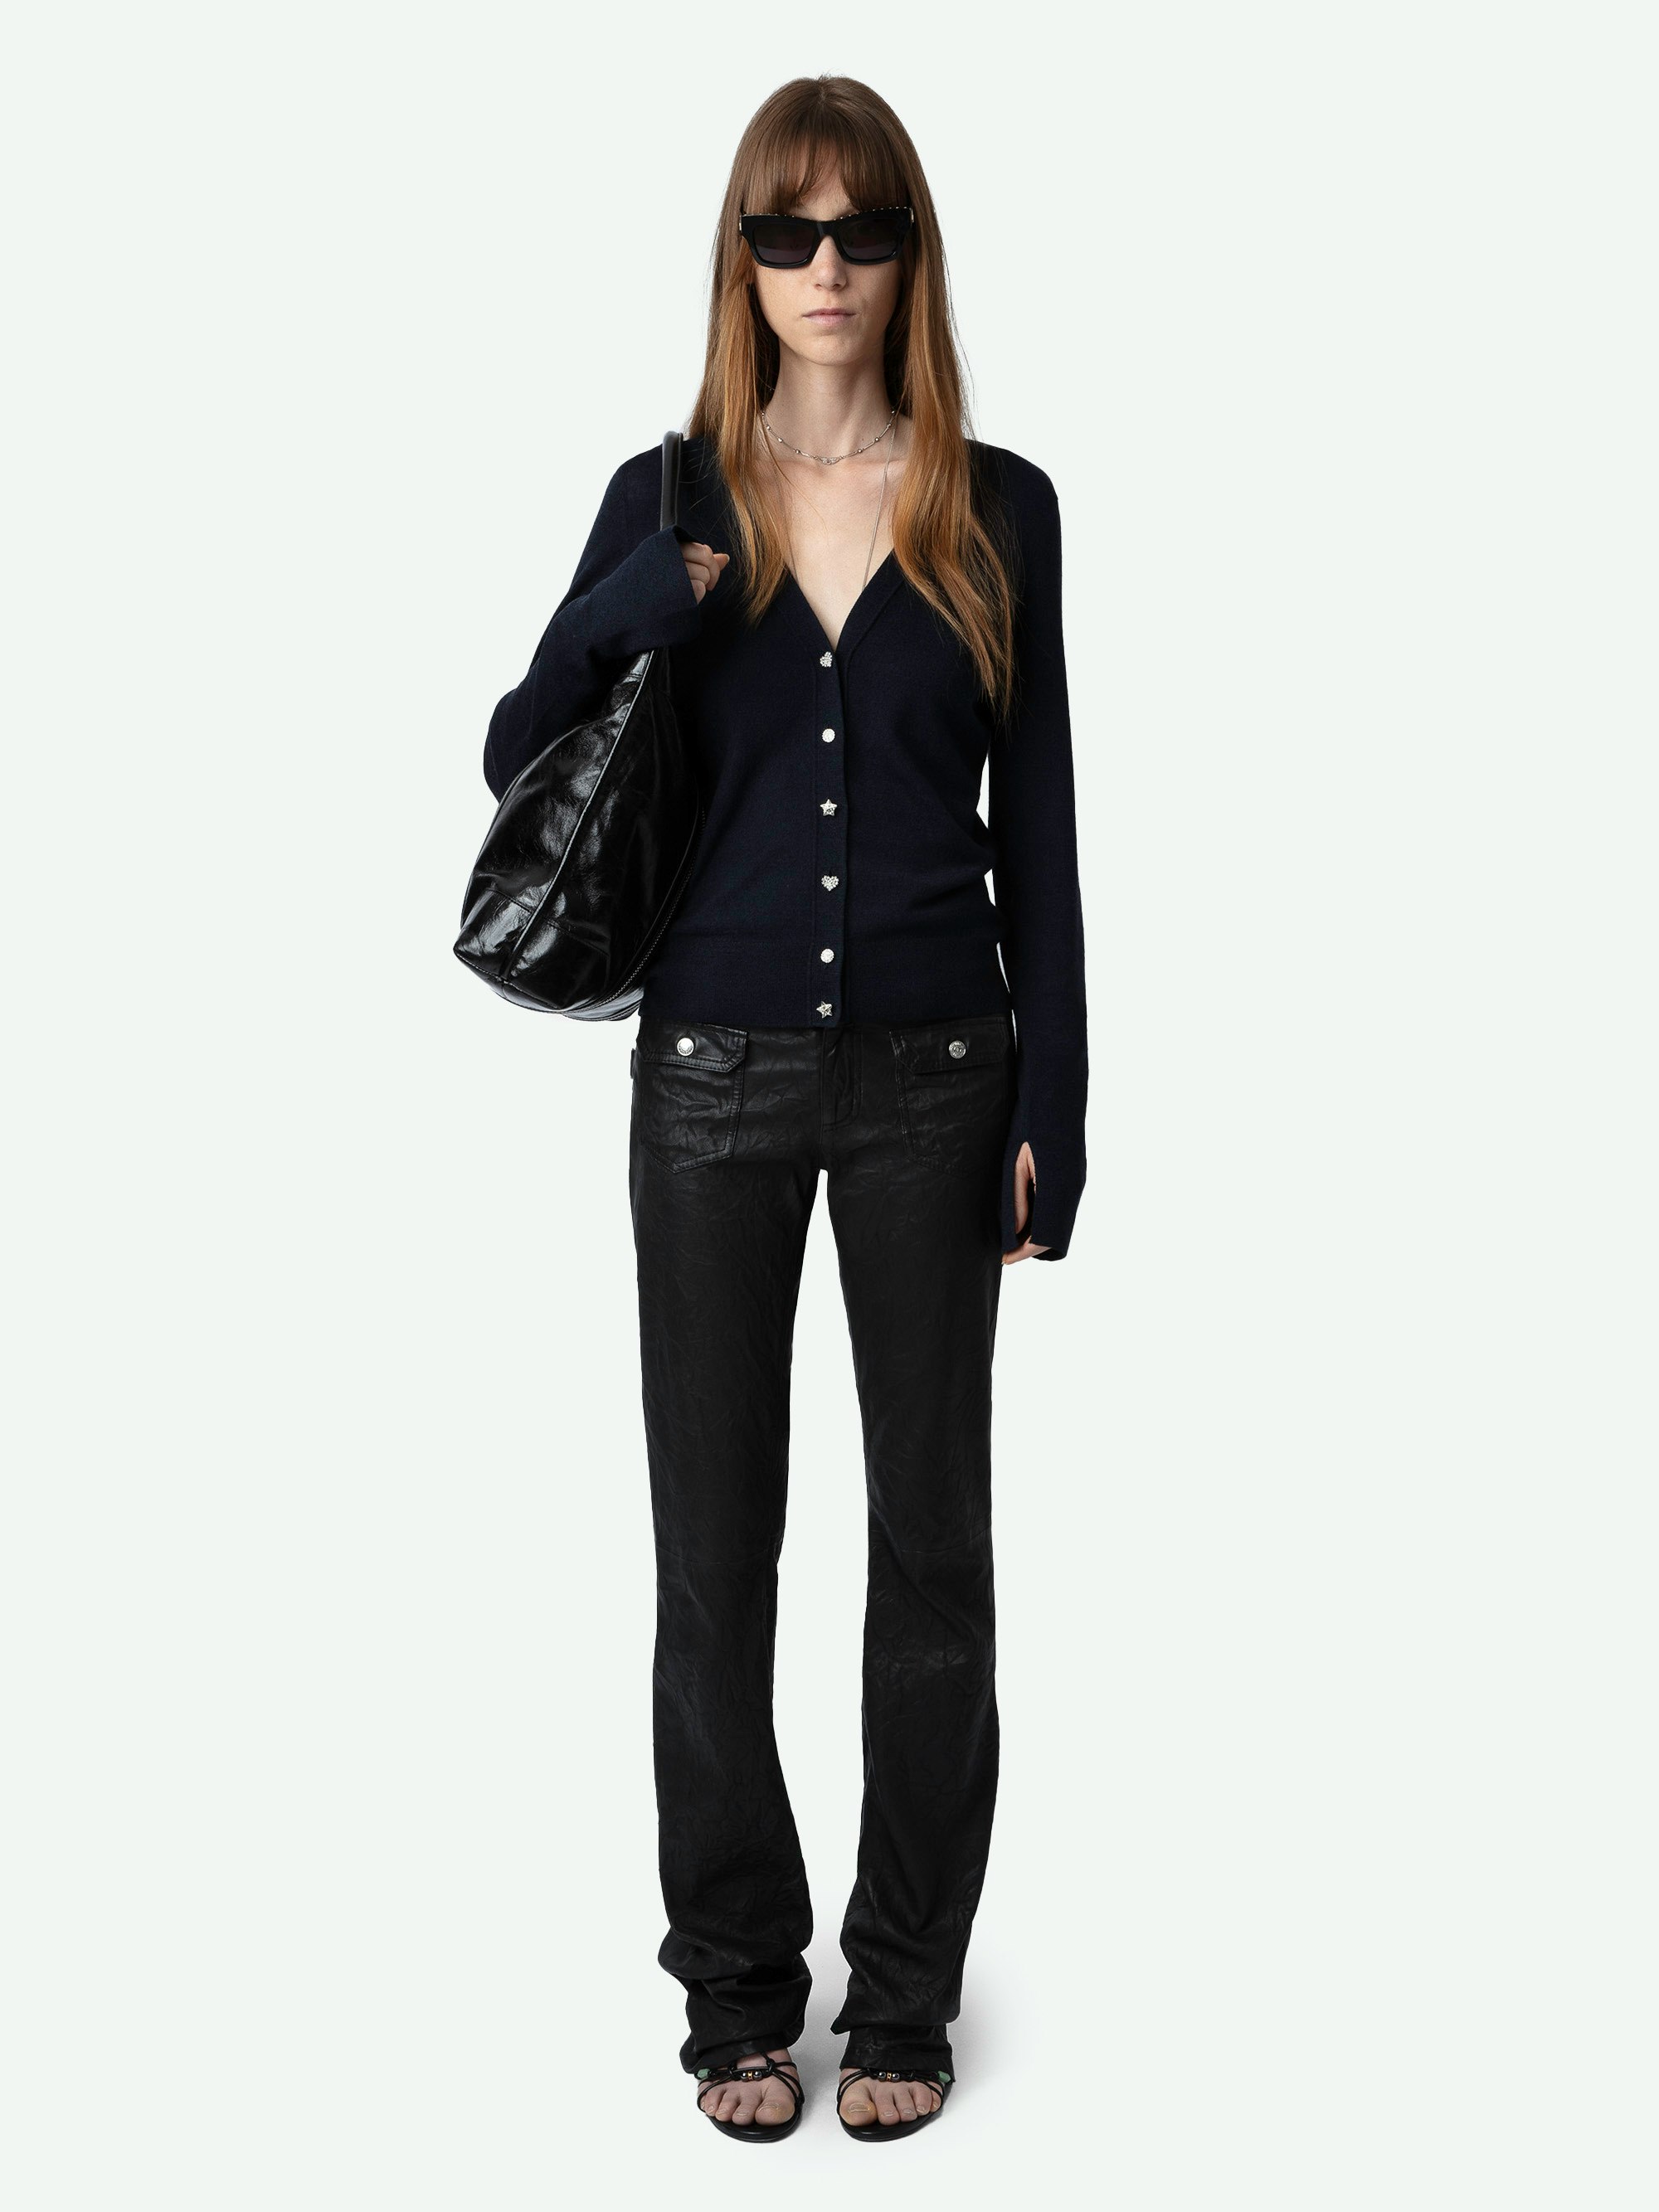 Jemma cardigan - Long-sleeved navy blue merino wool cardigan with diamante buttons and wings embroidered on the back.